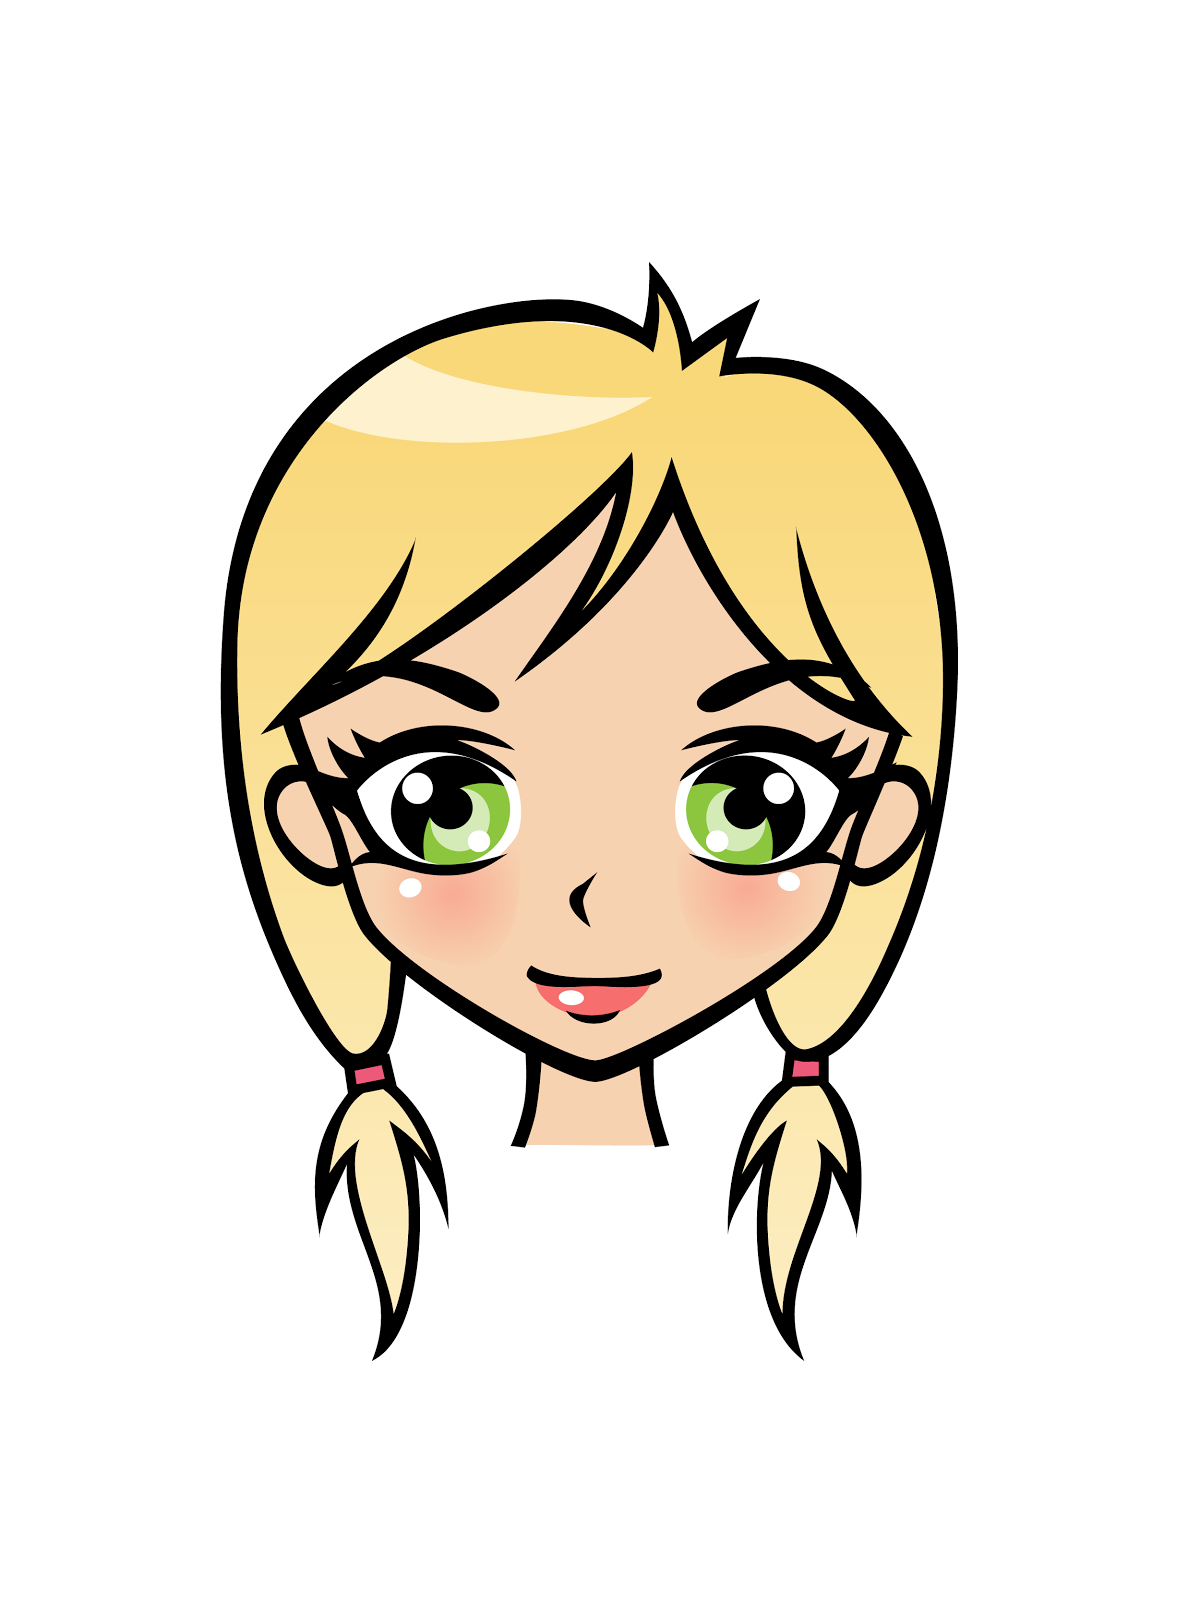 Cartoon Picture Of A Girl - ClipArt Best